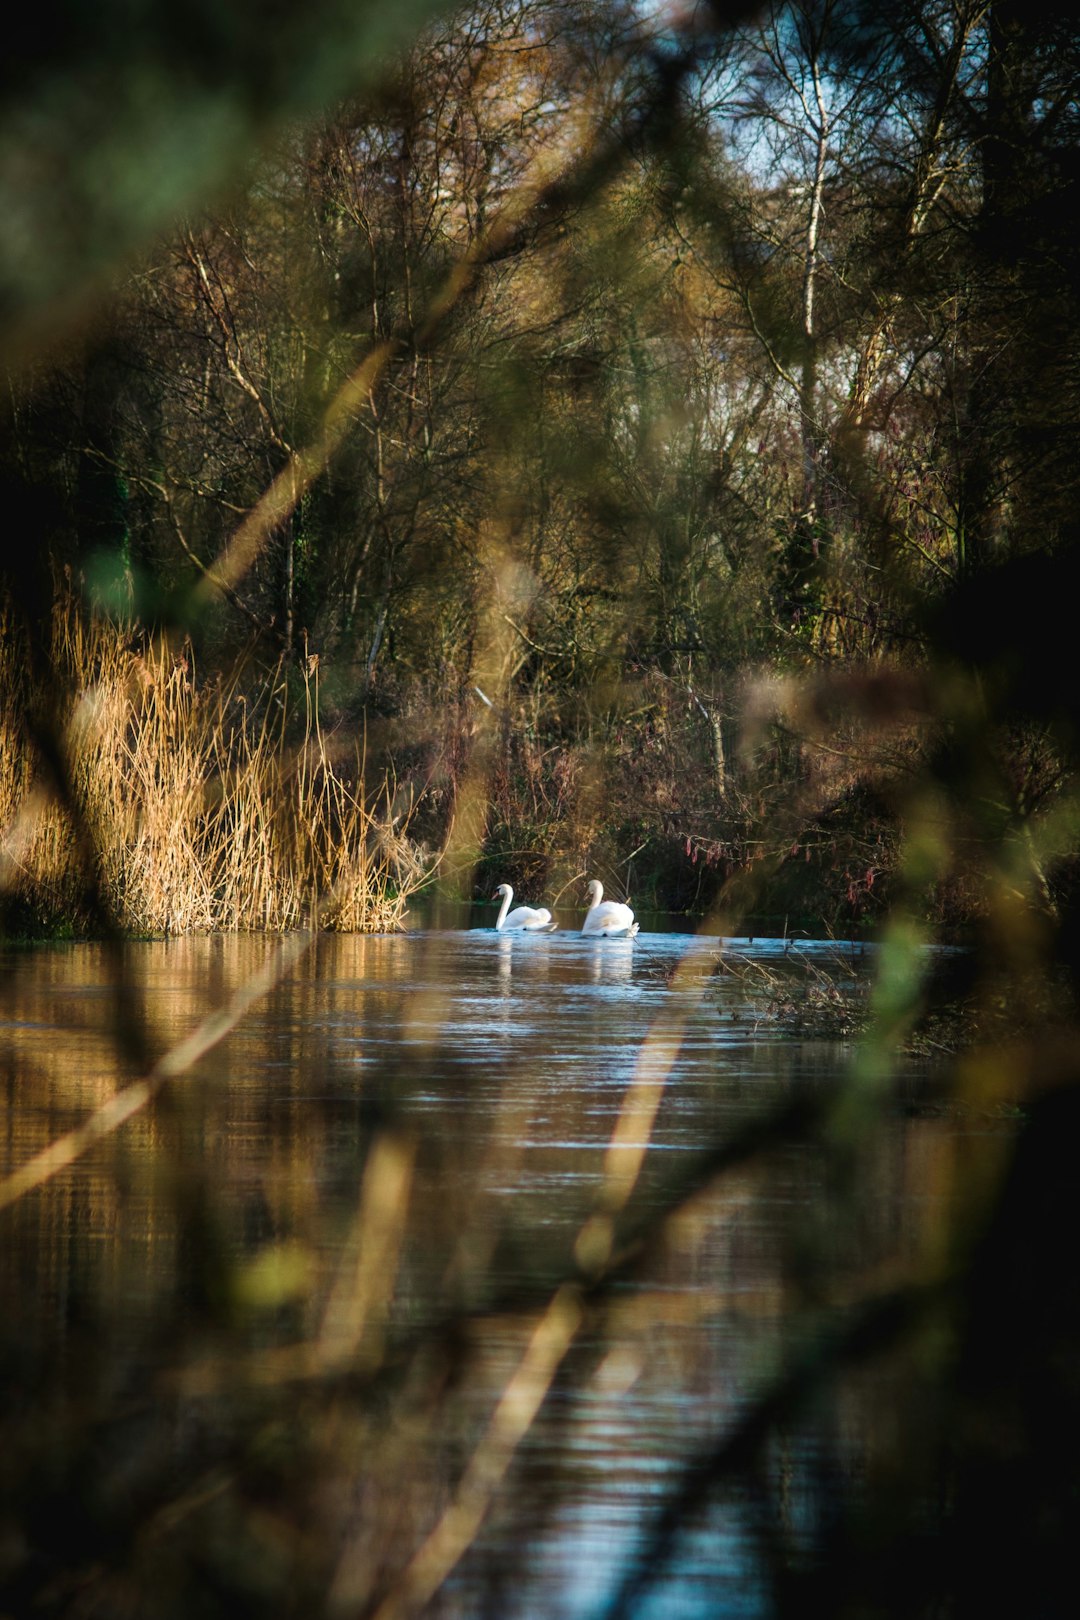 white swan on river surrounded by trees during daytime